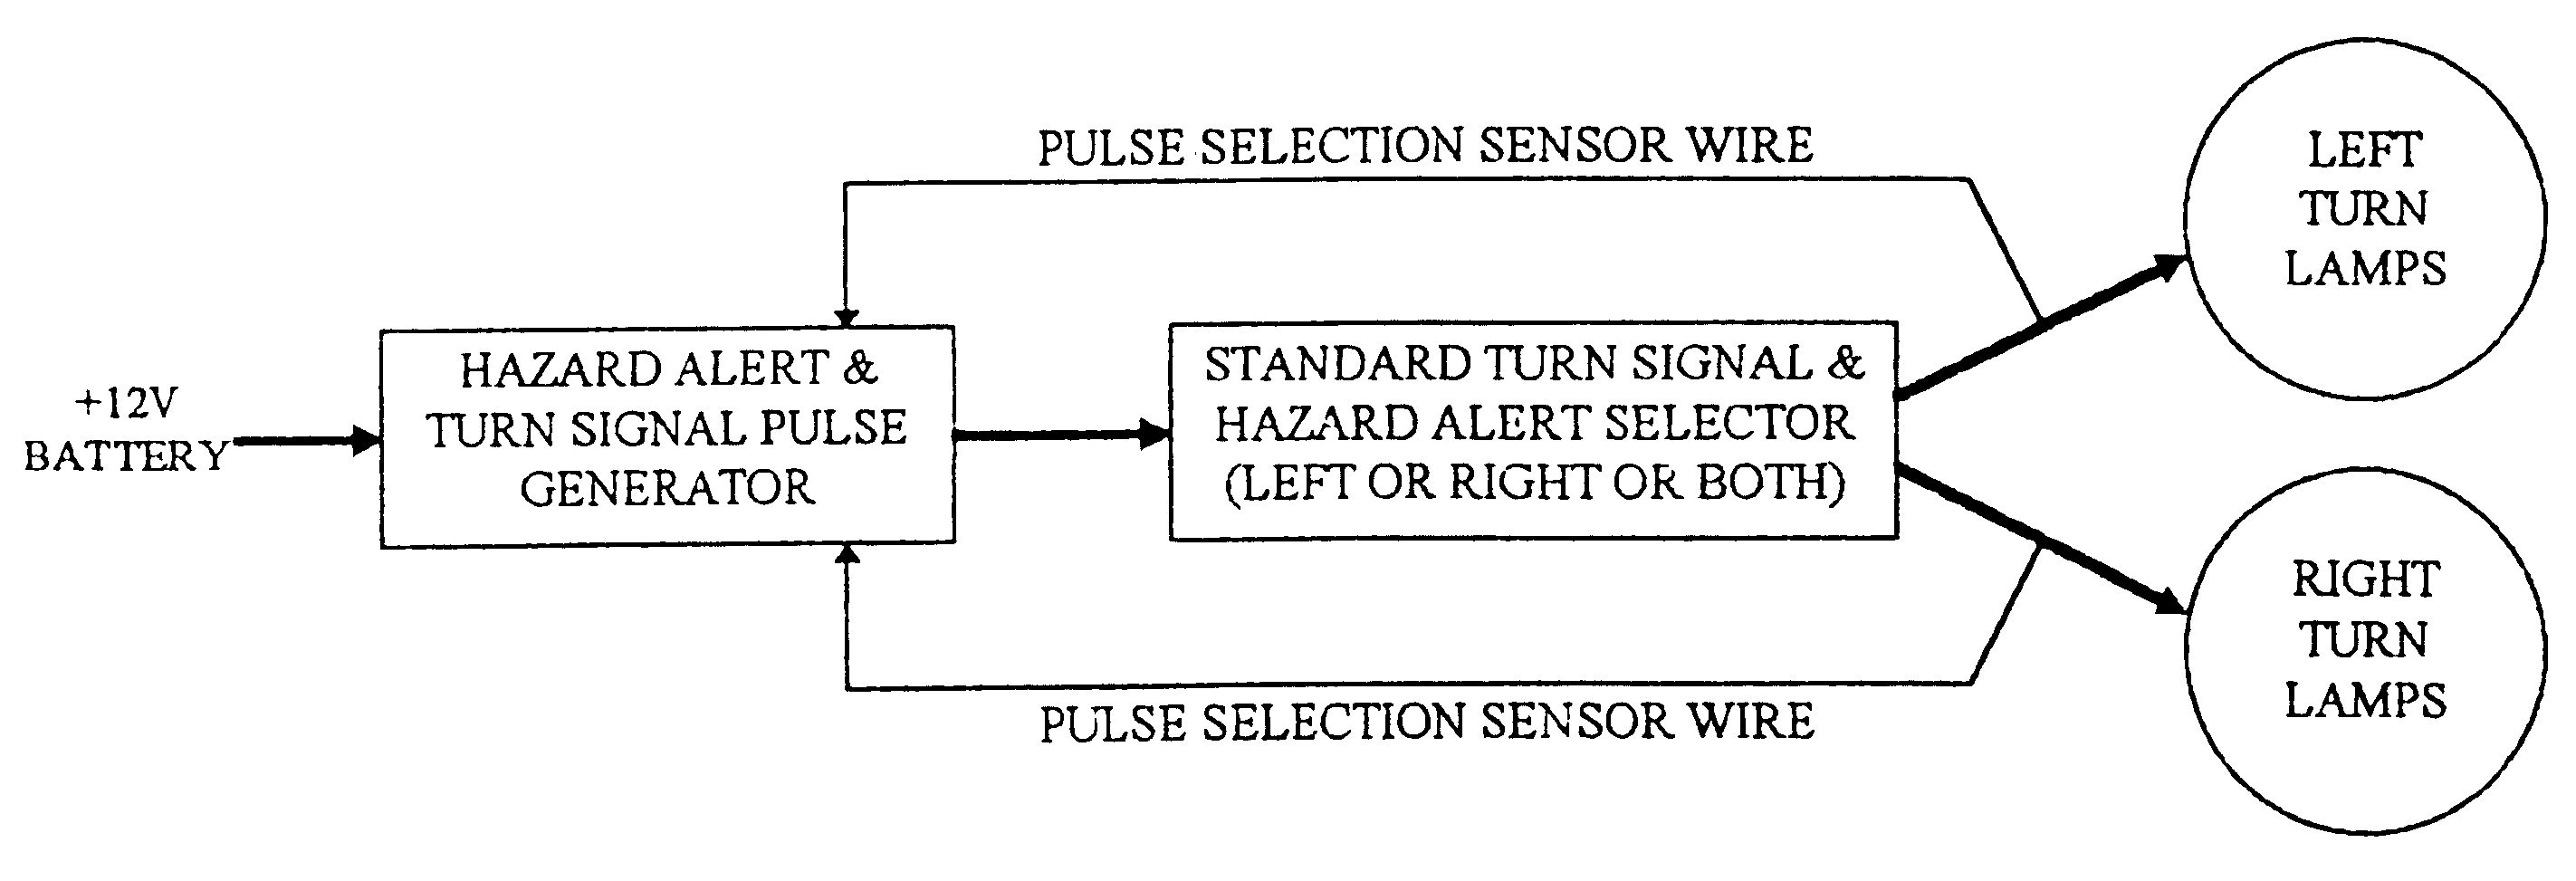 Distinctive hazard flash patterns for motor vehicles and for portable emergency warning devices with pulse generators to produce such patterns